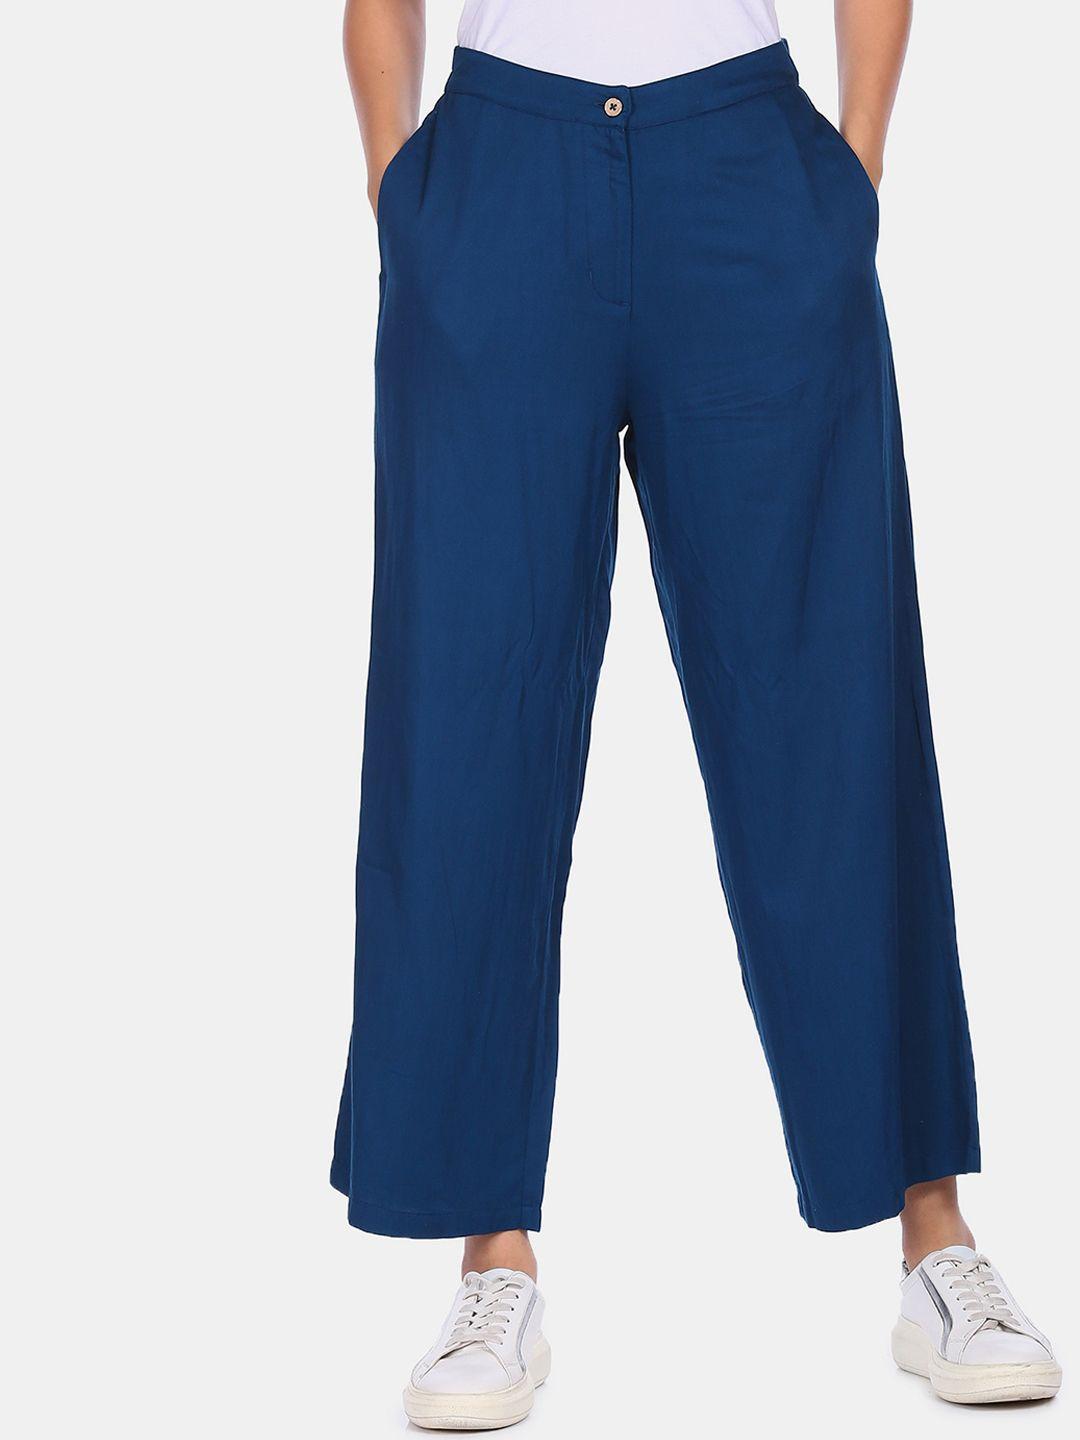 flying-machine-women-blue-parallel-trousers